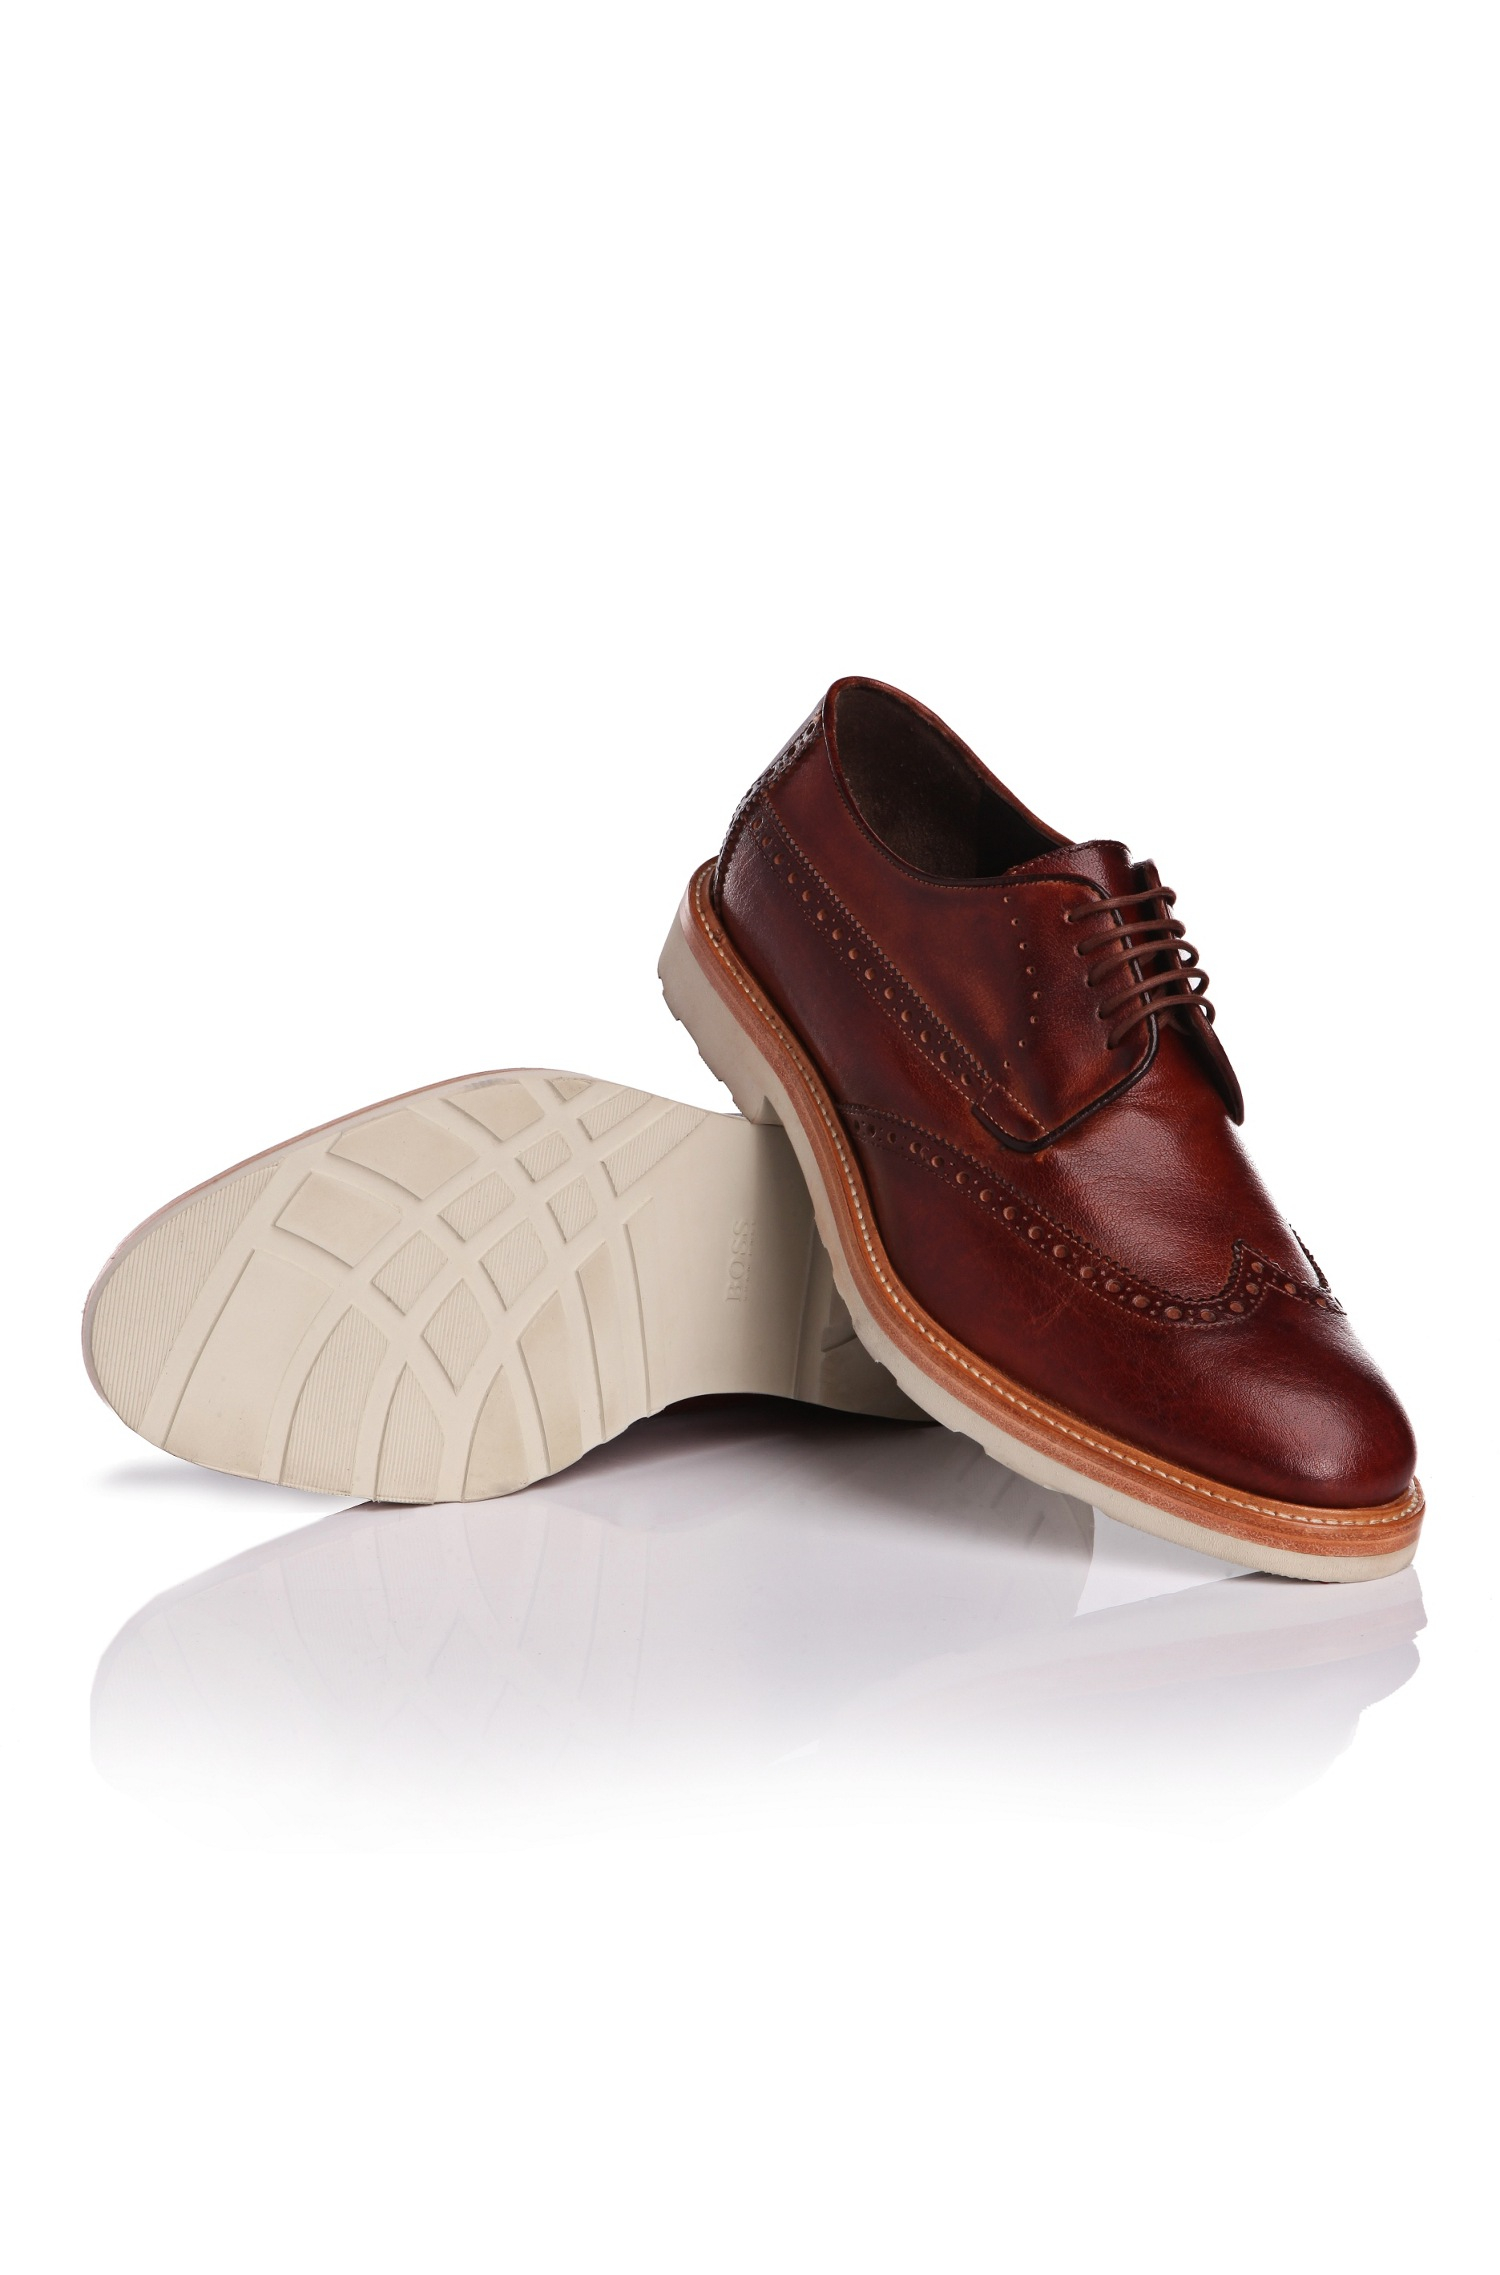 BOSS Orange Lace-Up Shoes 'Urdes' In Leather in Dark Brown (Brown) for Men  - Lyst